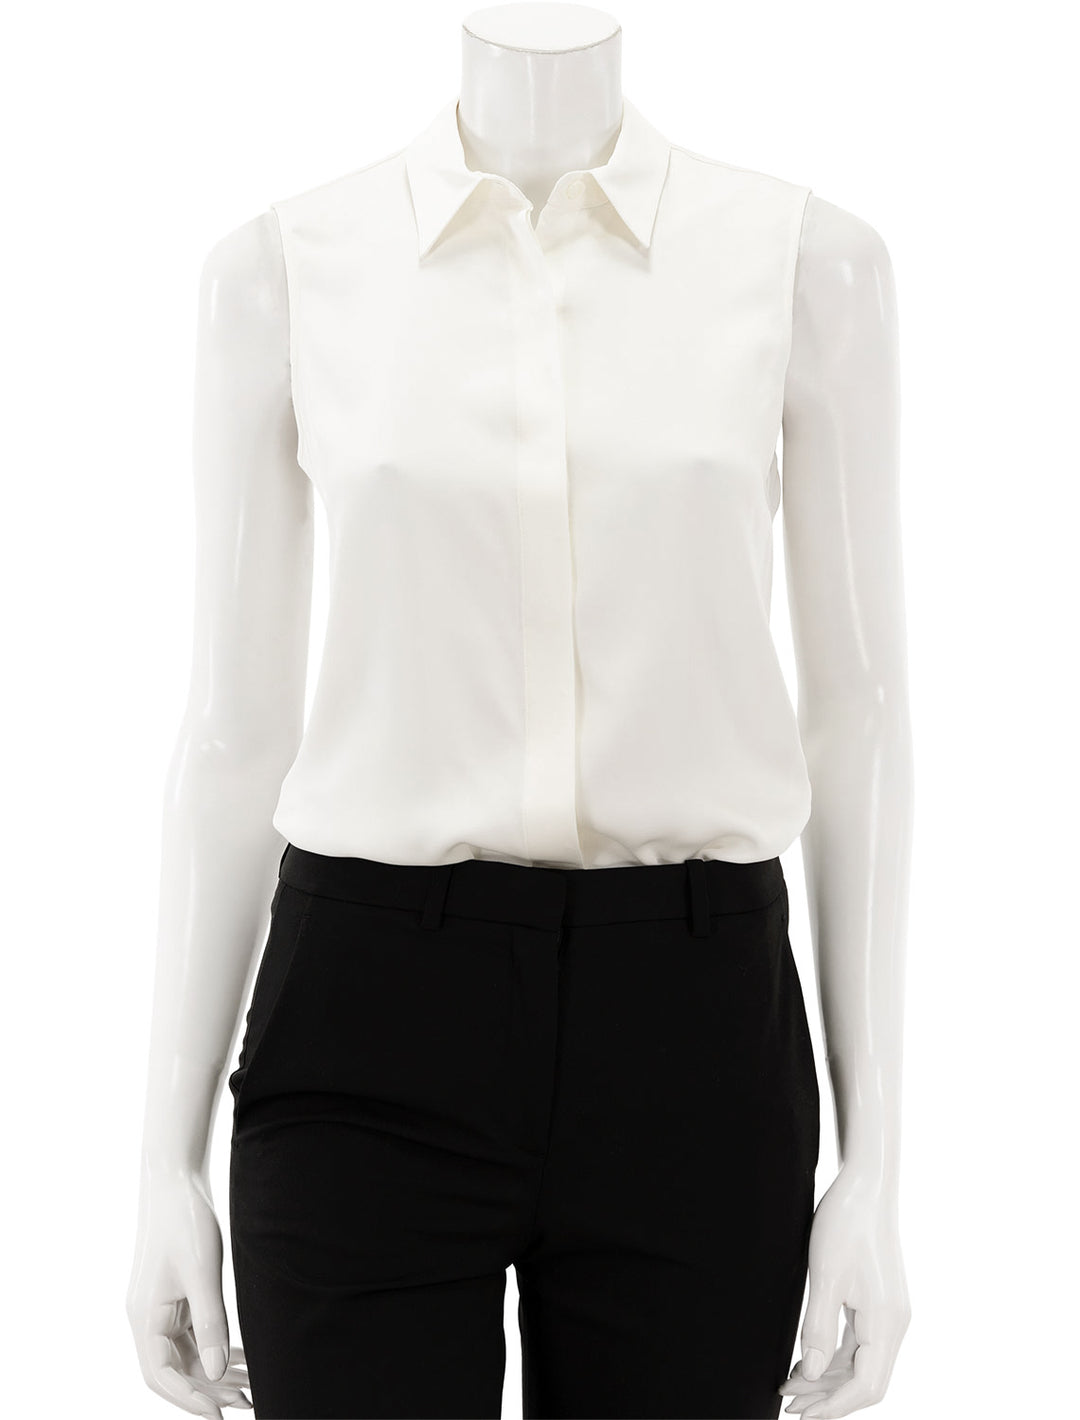 Front view of Theory's tanelis modern sleeveless blouse in ivory, tucked into a pair of dress slacks.